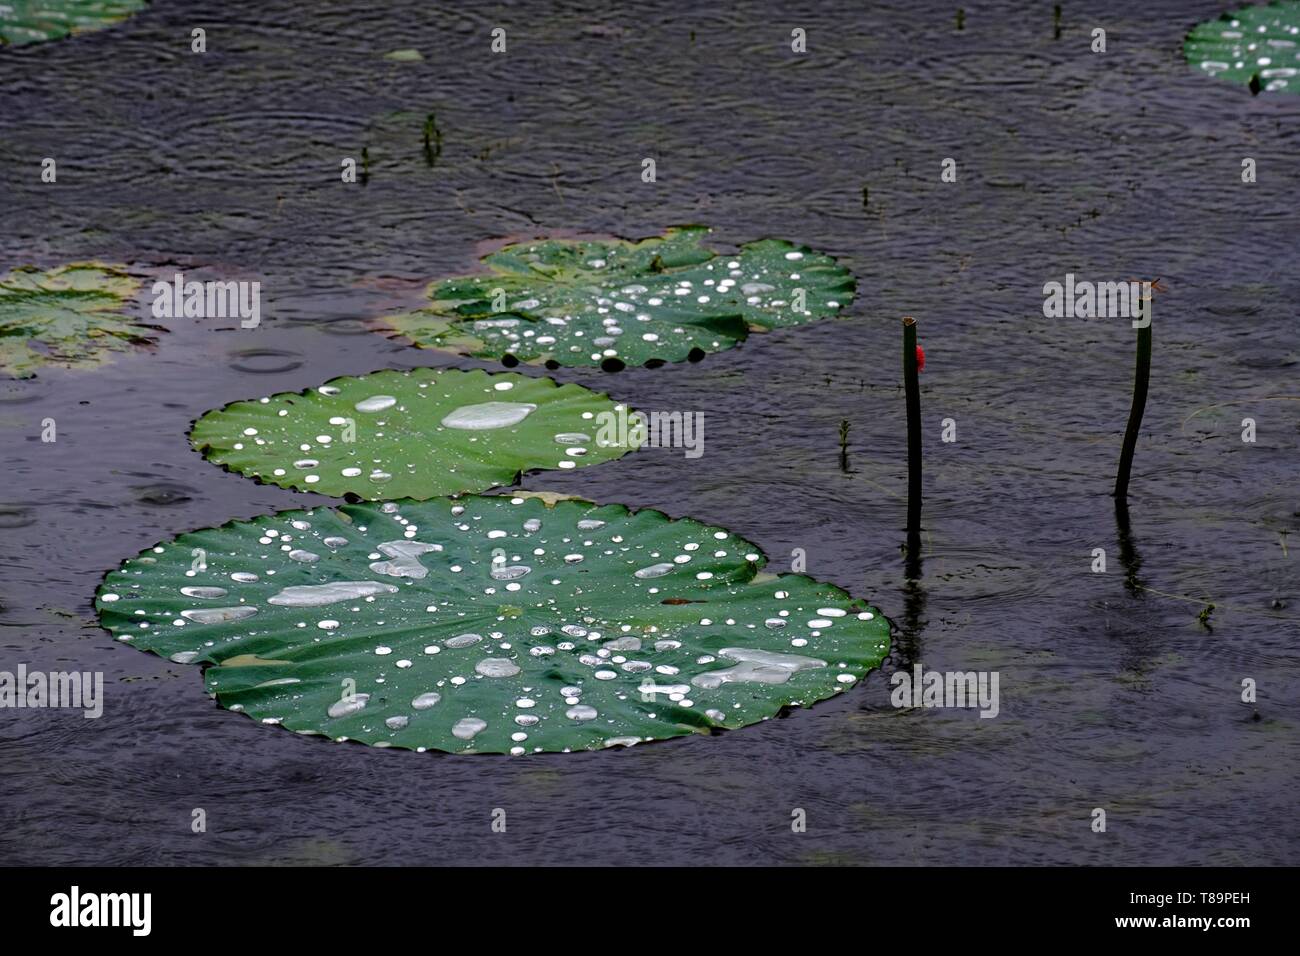 Vietnam, Hoa Lu, inland Ha Long bay, lotus leaves in the Tam Coc channels Stock Photo